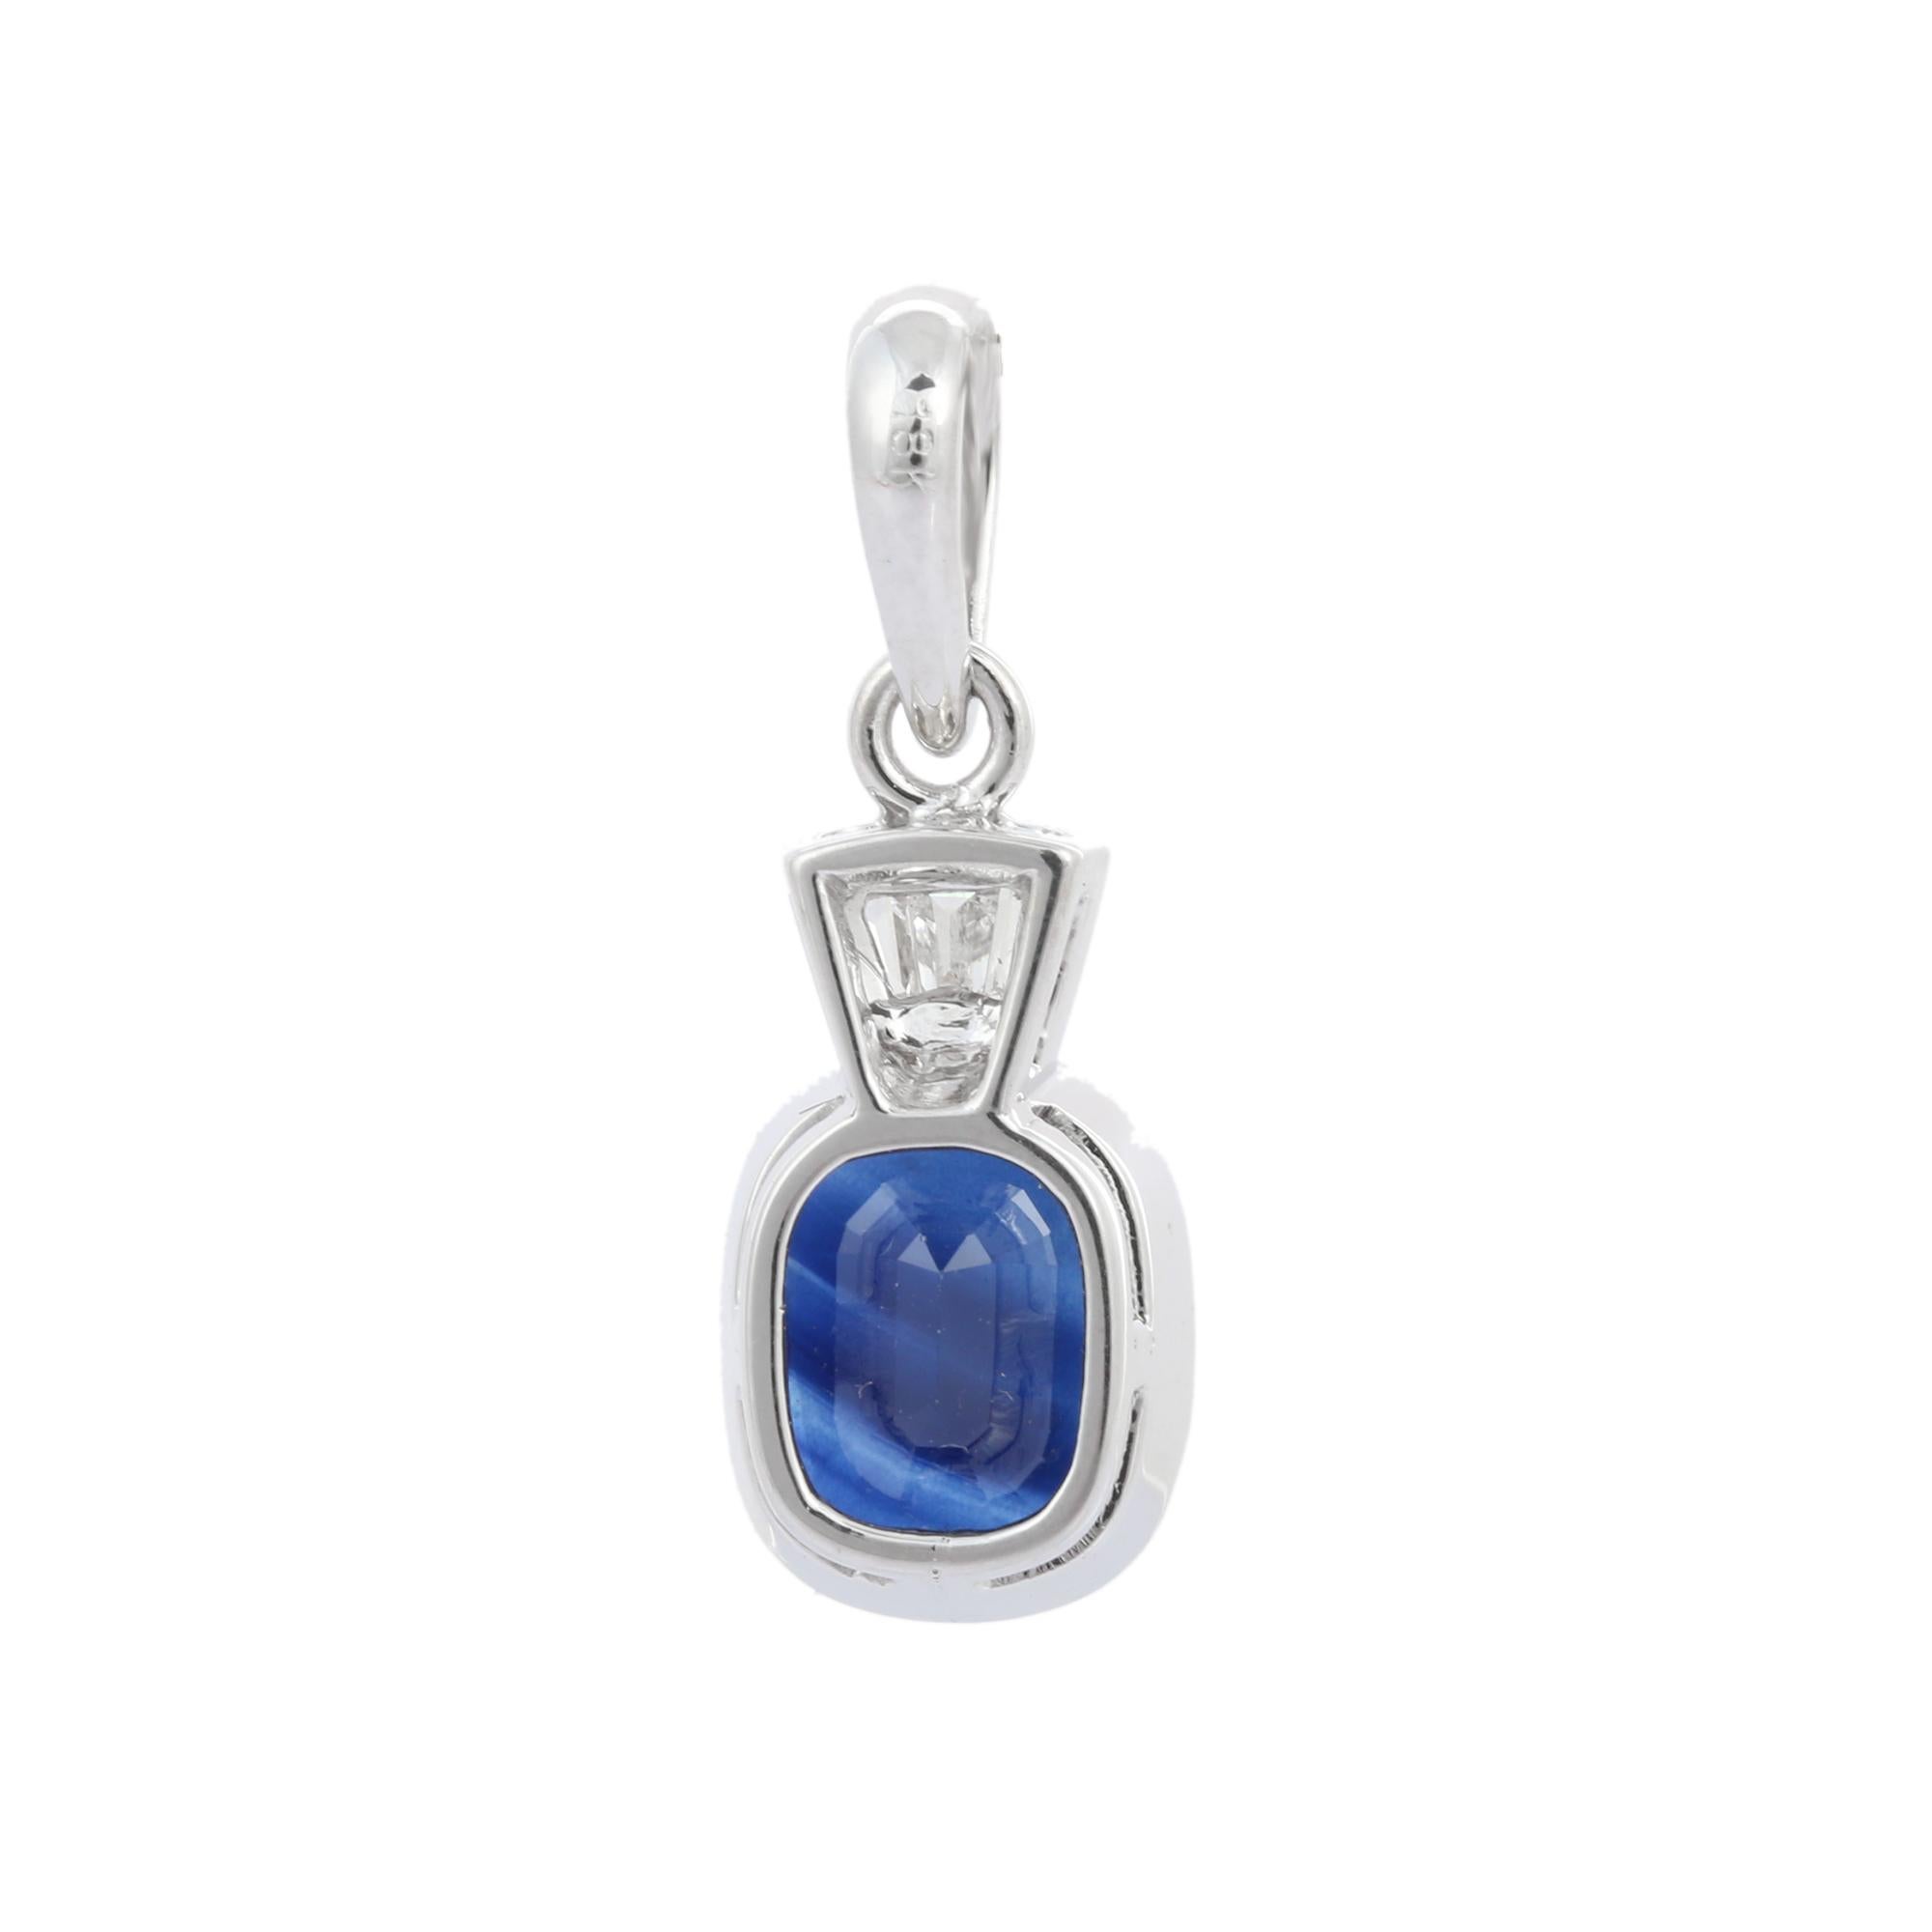 Octagon Cut 3.45 Carat Cushion Cut Blue Sapphire Pendant with Diamonds in 18K White Gold For Sale